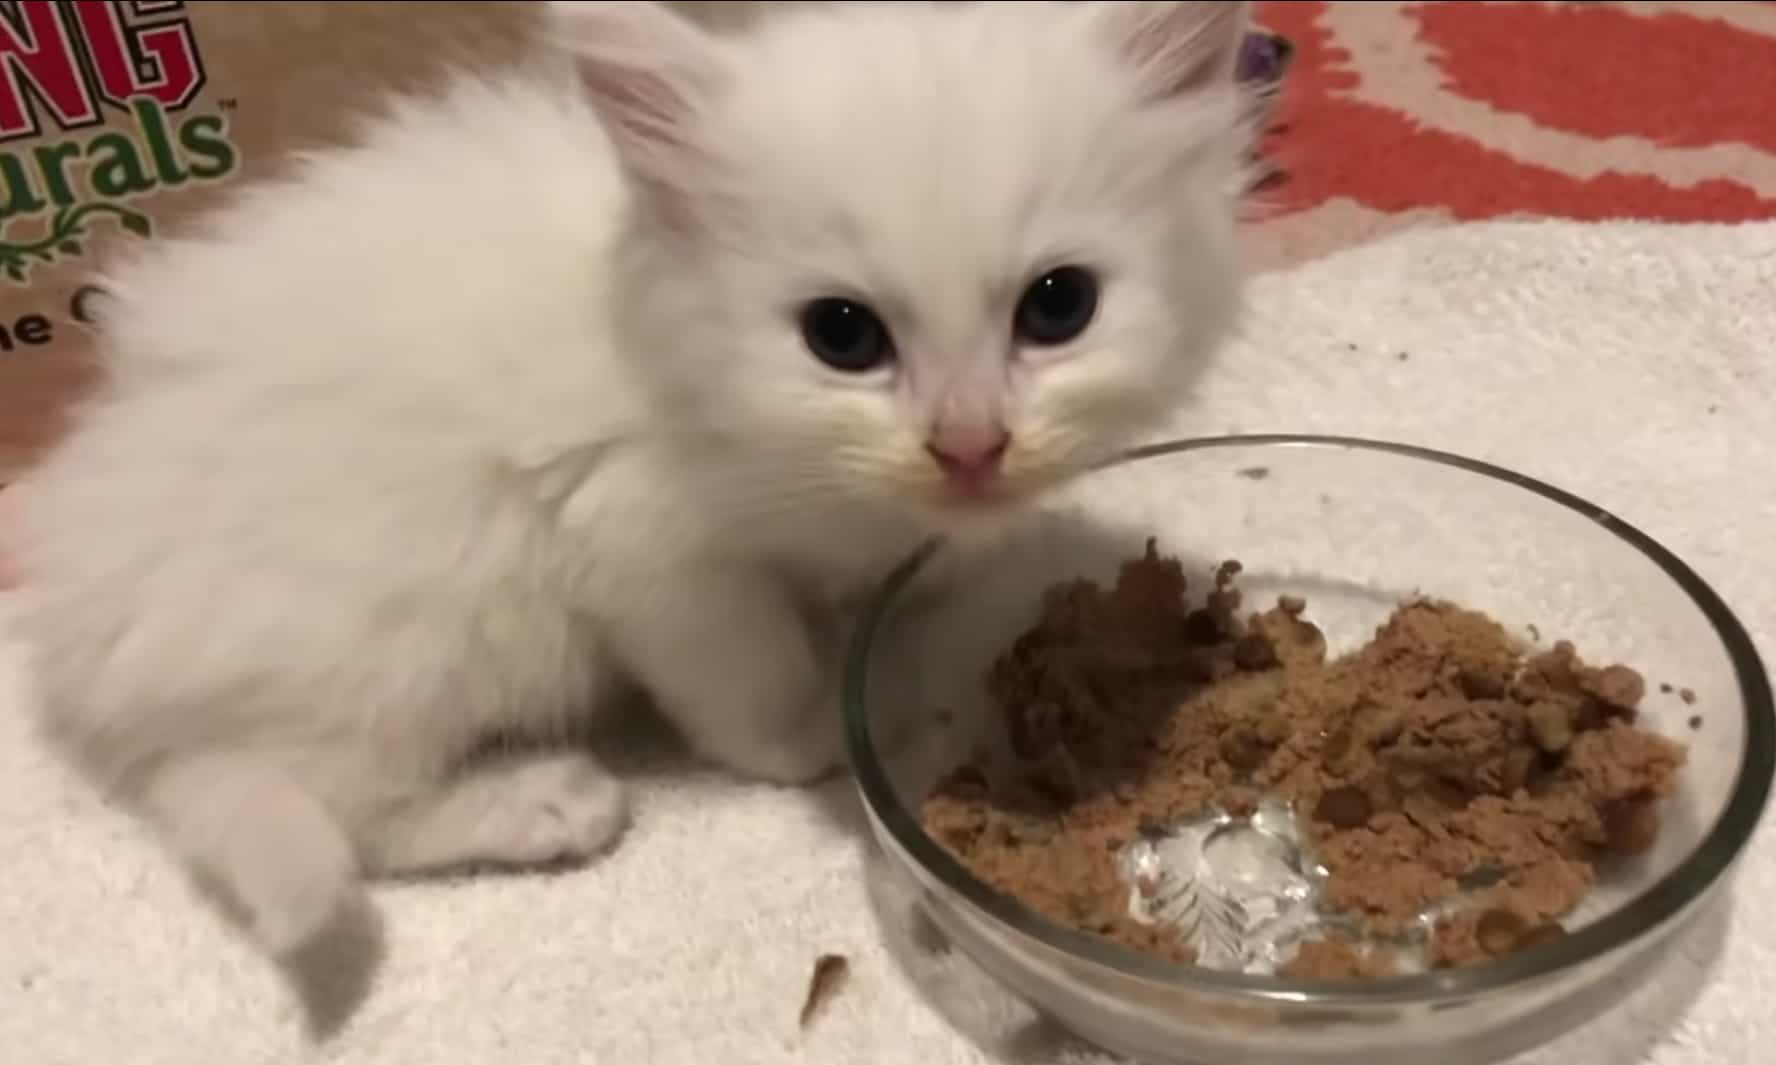 When Can a Kitten Eat Dry Food